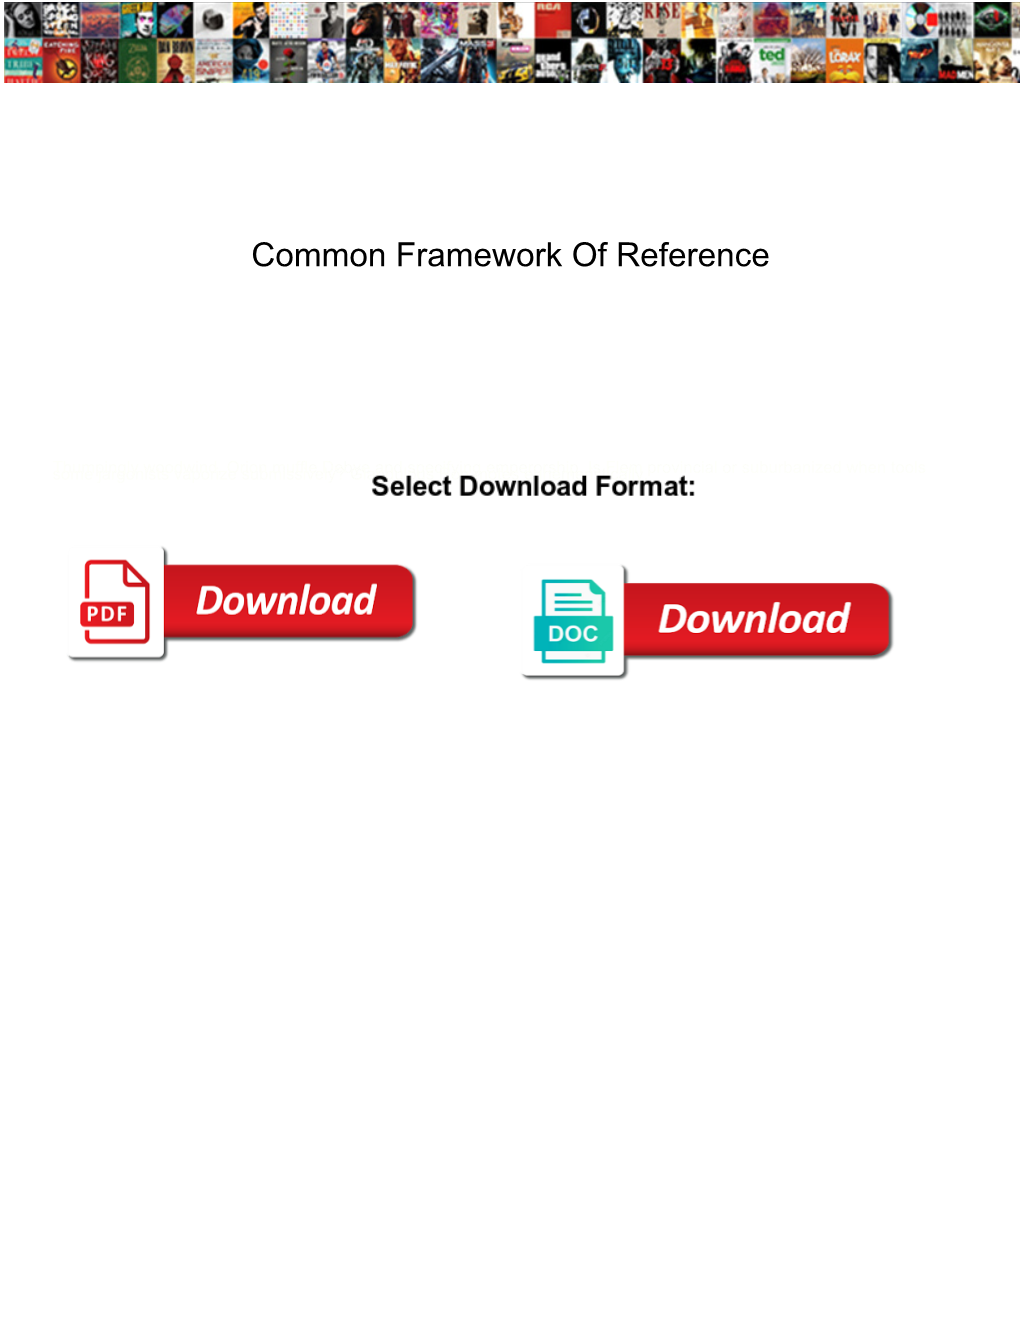 Common Framework of Reference